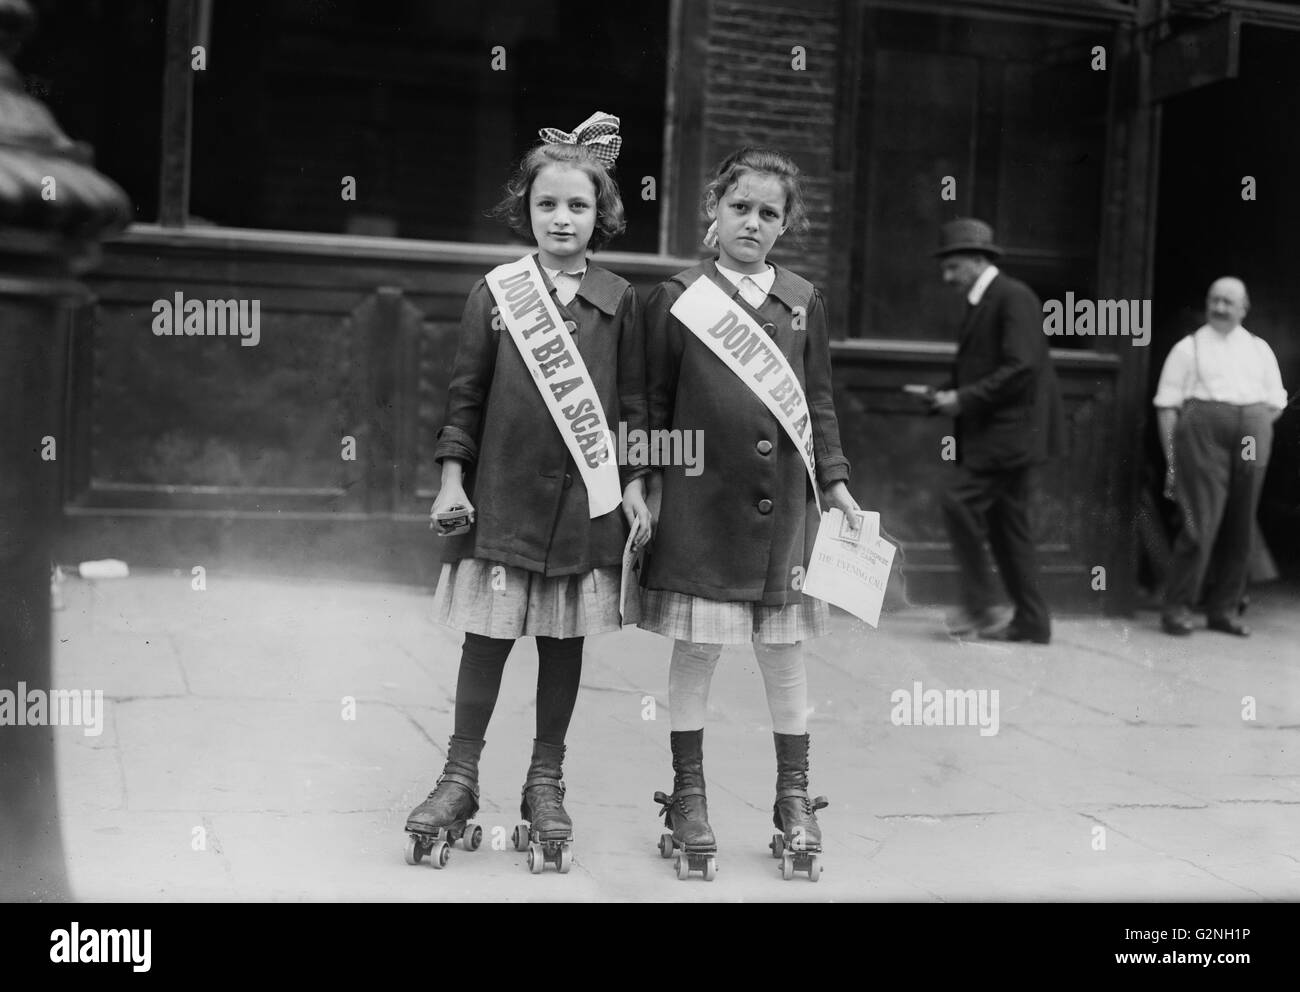 Two young transit strike sympathizers on Roller Skates, New York City, New York, USA, Bain News Service, 1916 Stock Photo